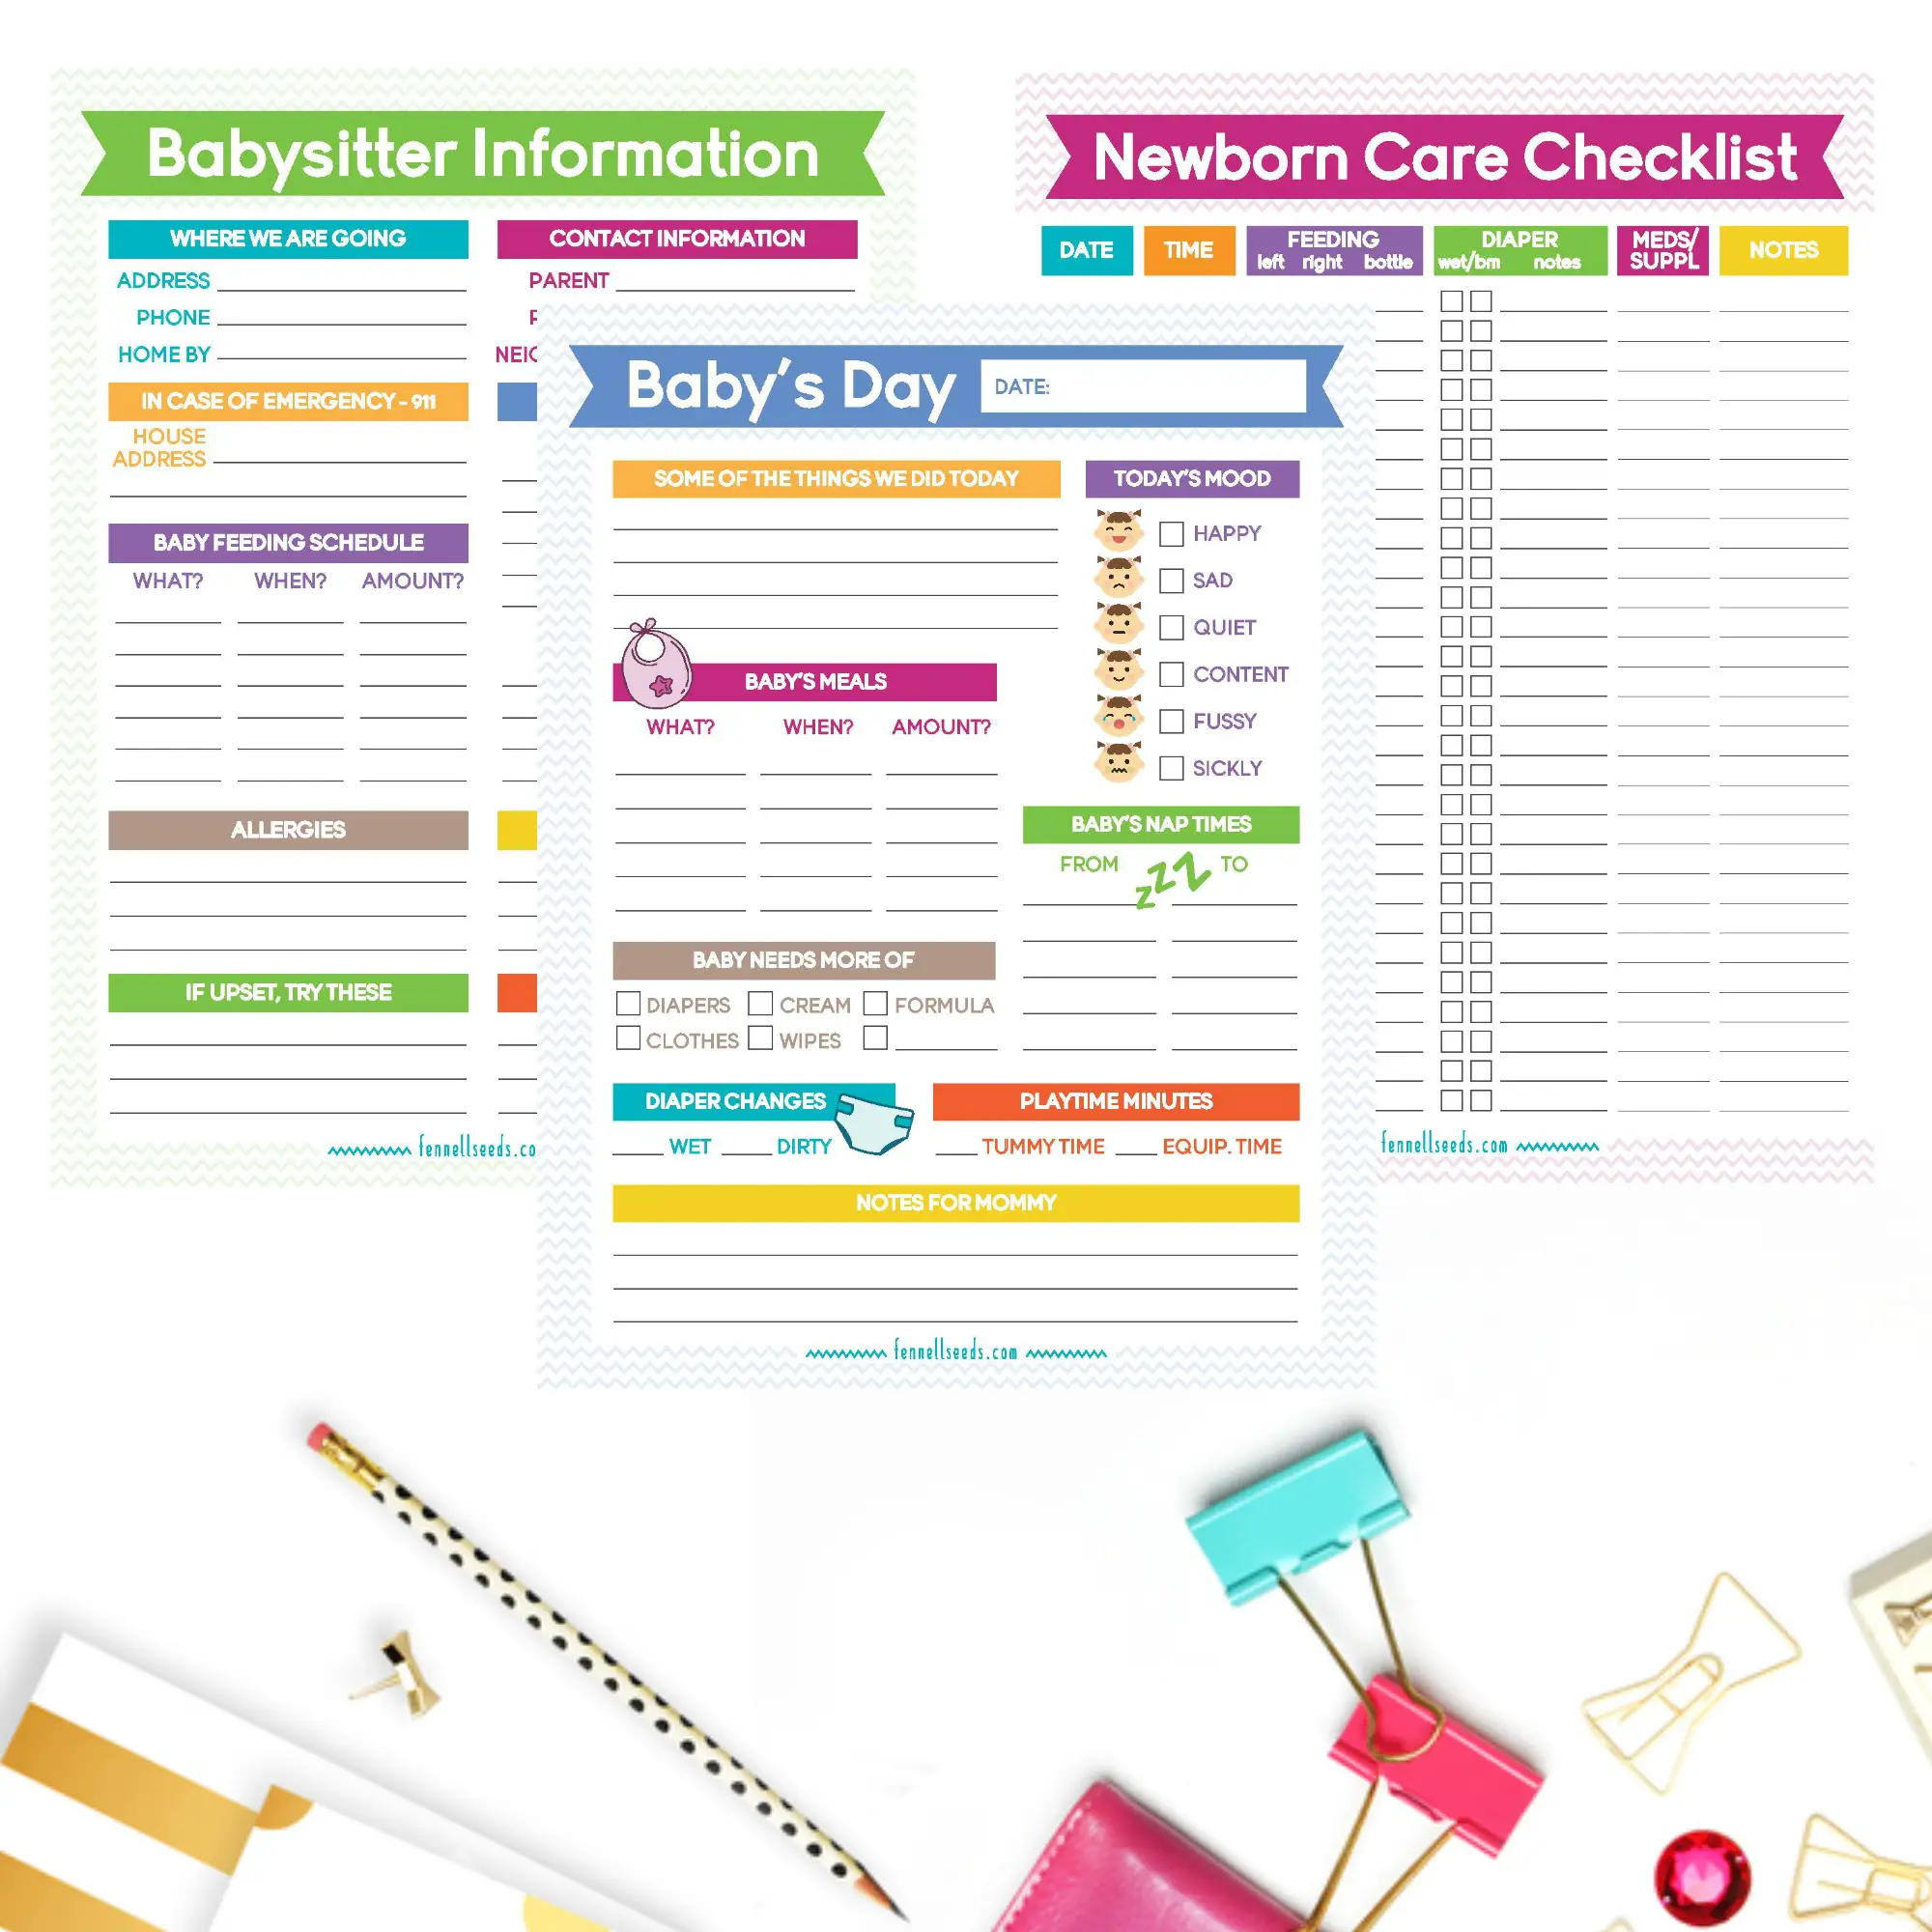 Newborn Printables | Organize your new baby's information with these 6 printables. Print as many as you would like. | Newborn Checklist | Babysitter Information | Baby's Day Information